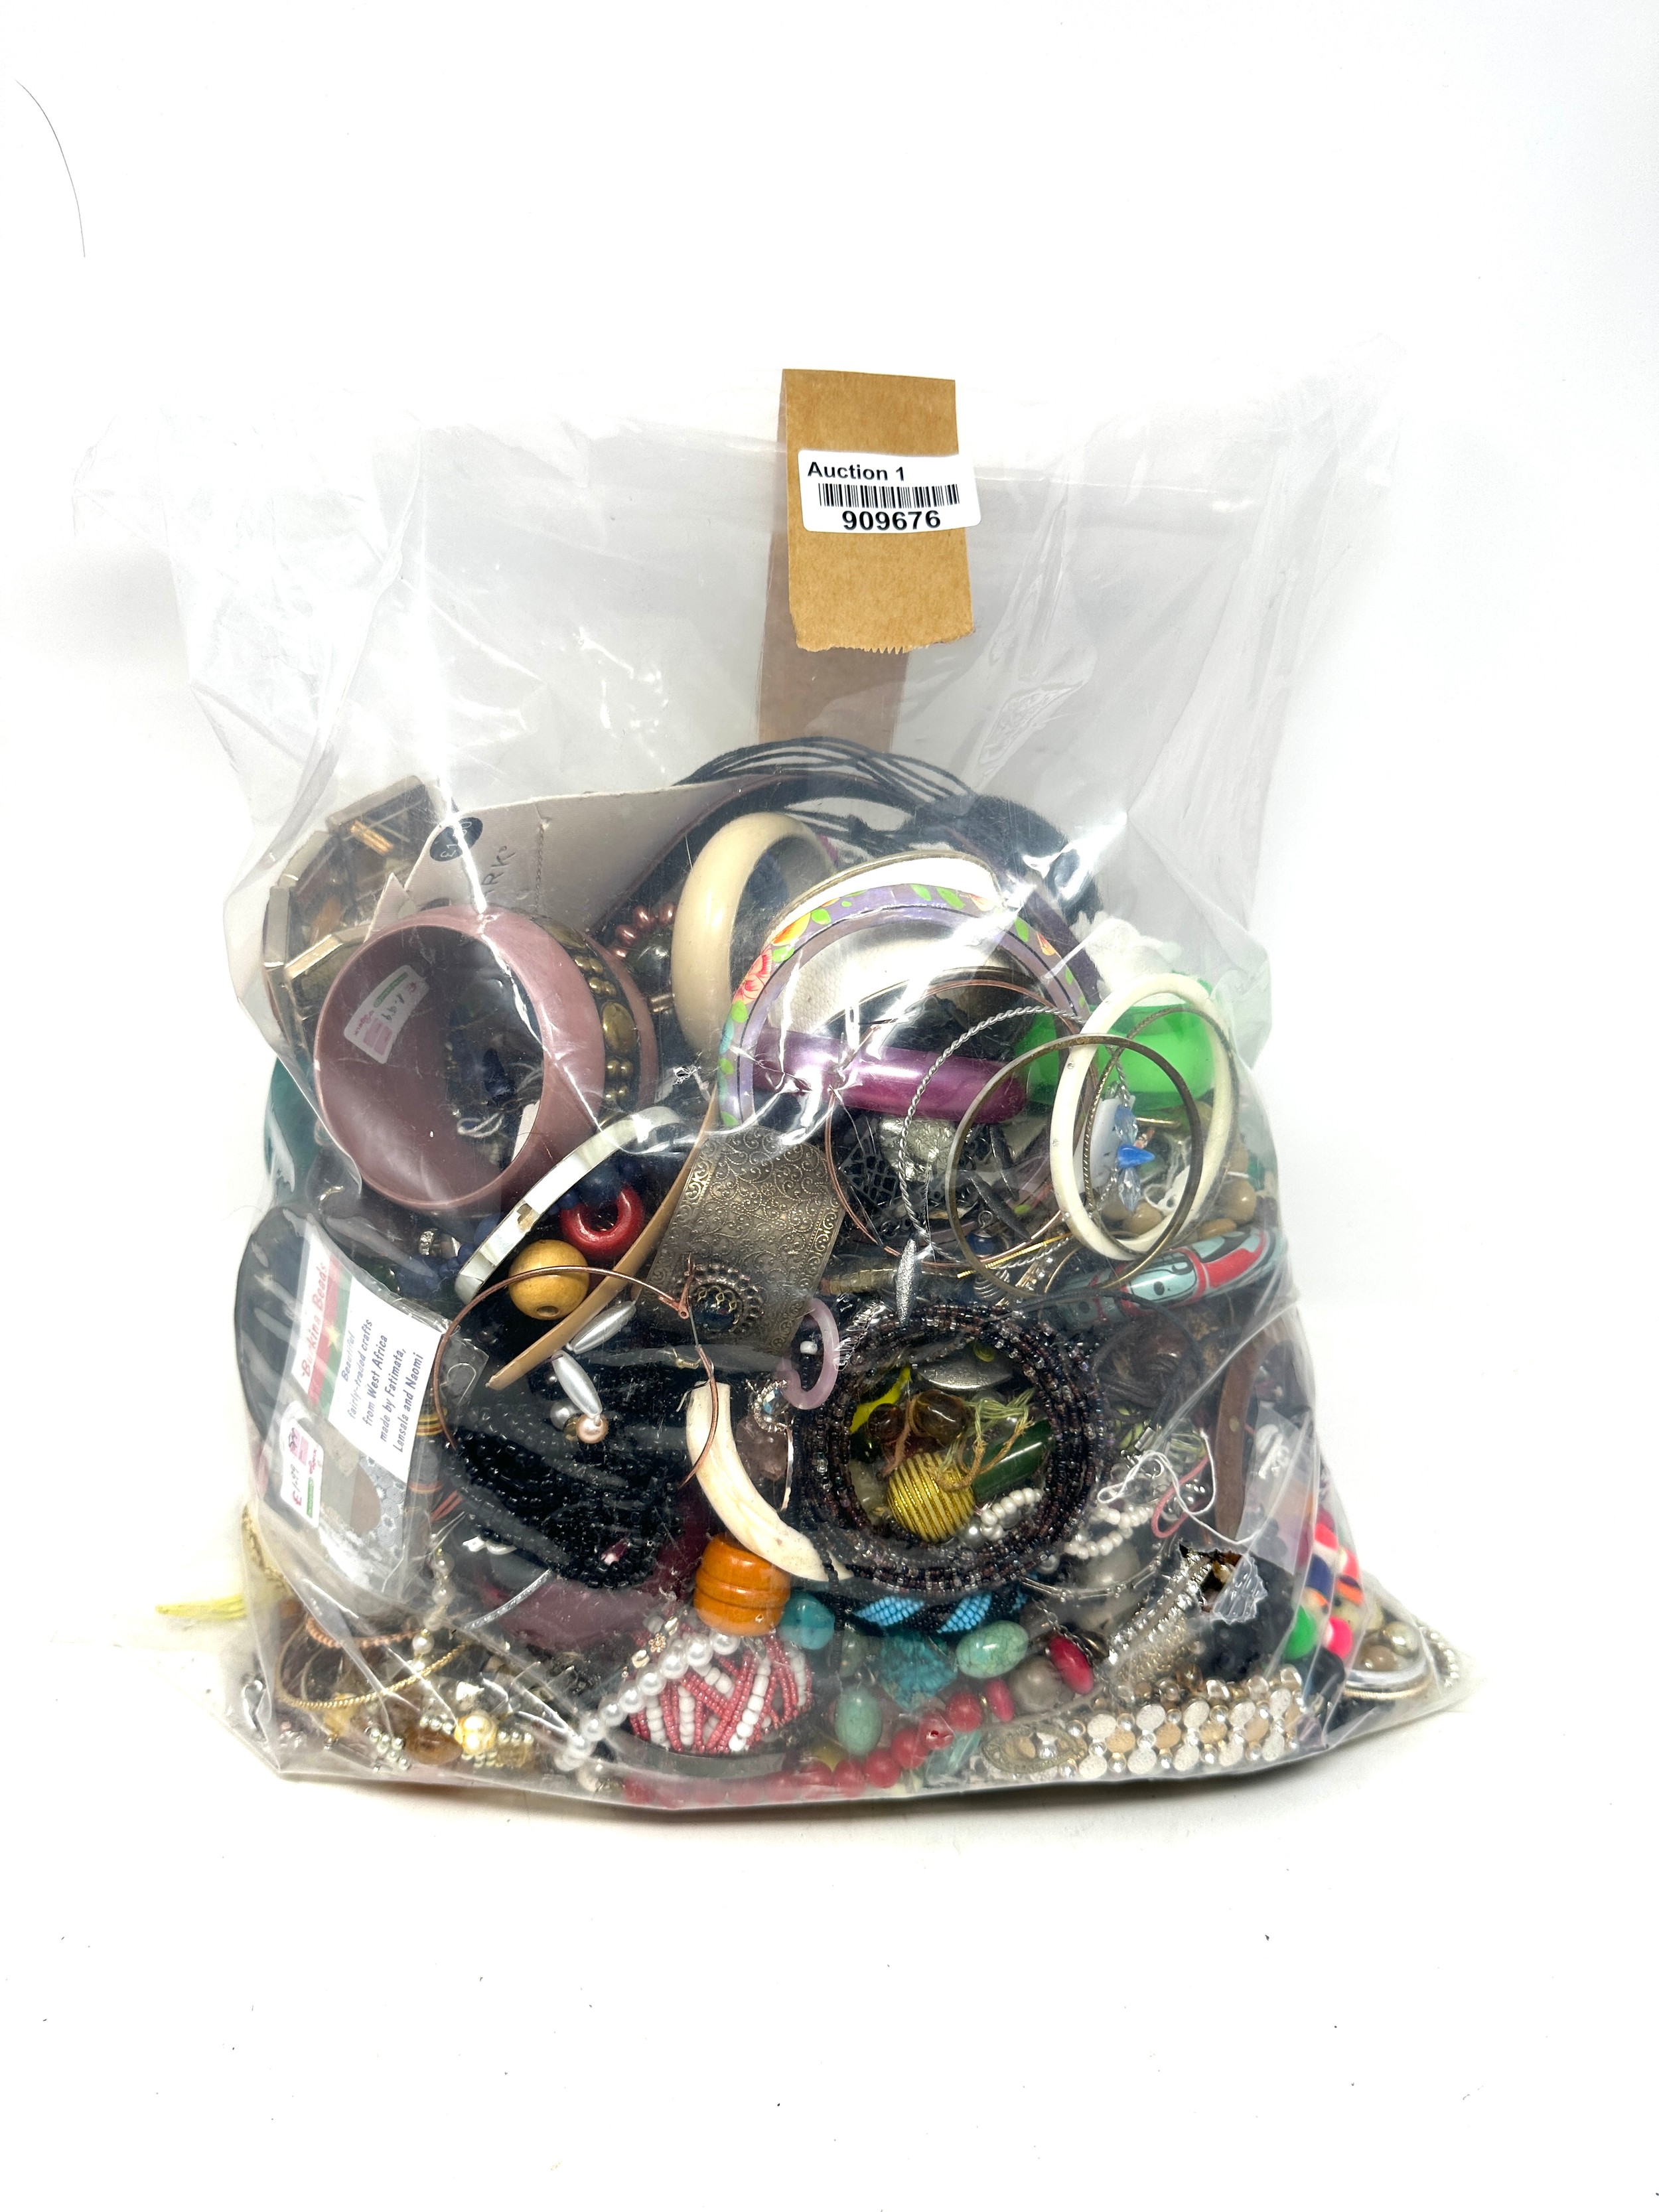 10kg UNSORTED COSTUME JEWELLERY inc. Bangles, Necklaces, Rings, Earrings.parts spares